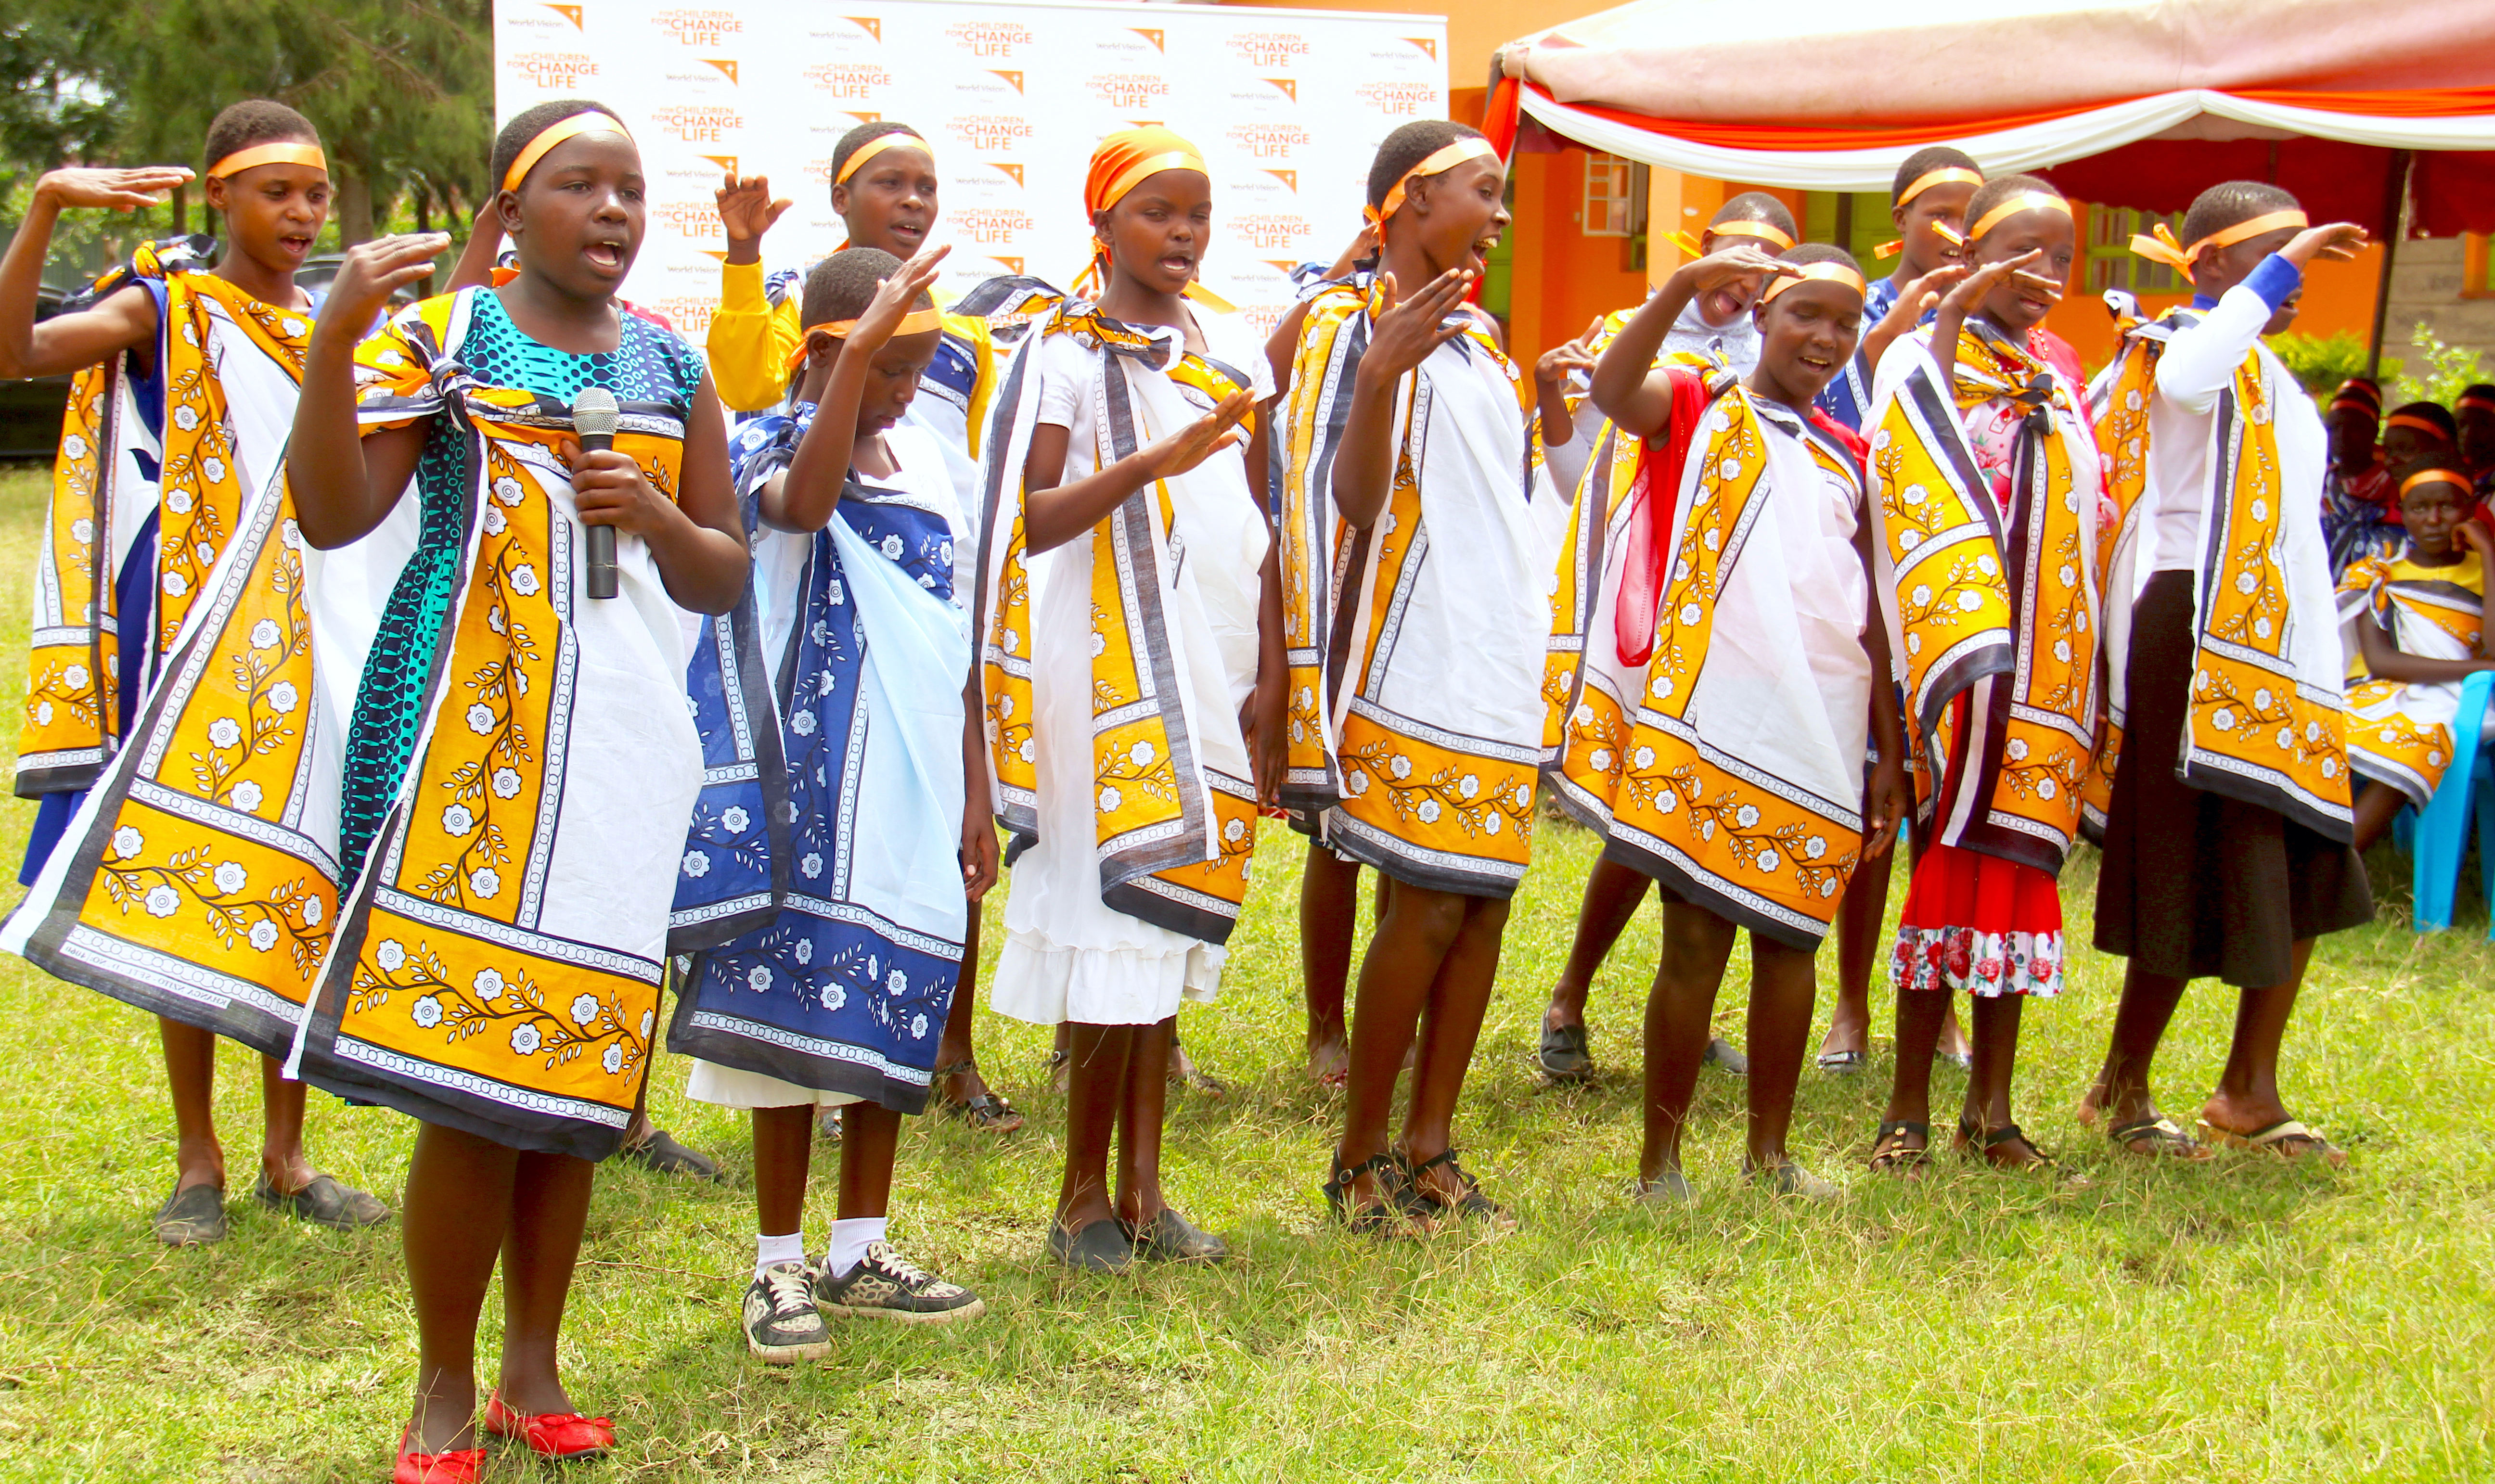 Girls that have graduated from the Alternative Rights of Passage ceremony that enables them to transition into adulthood without undergoing FGM. ©world Vision Photo/Sarah Ooko.